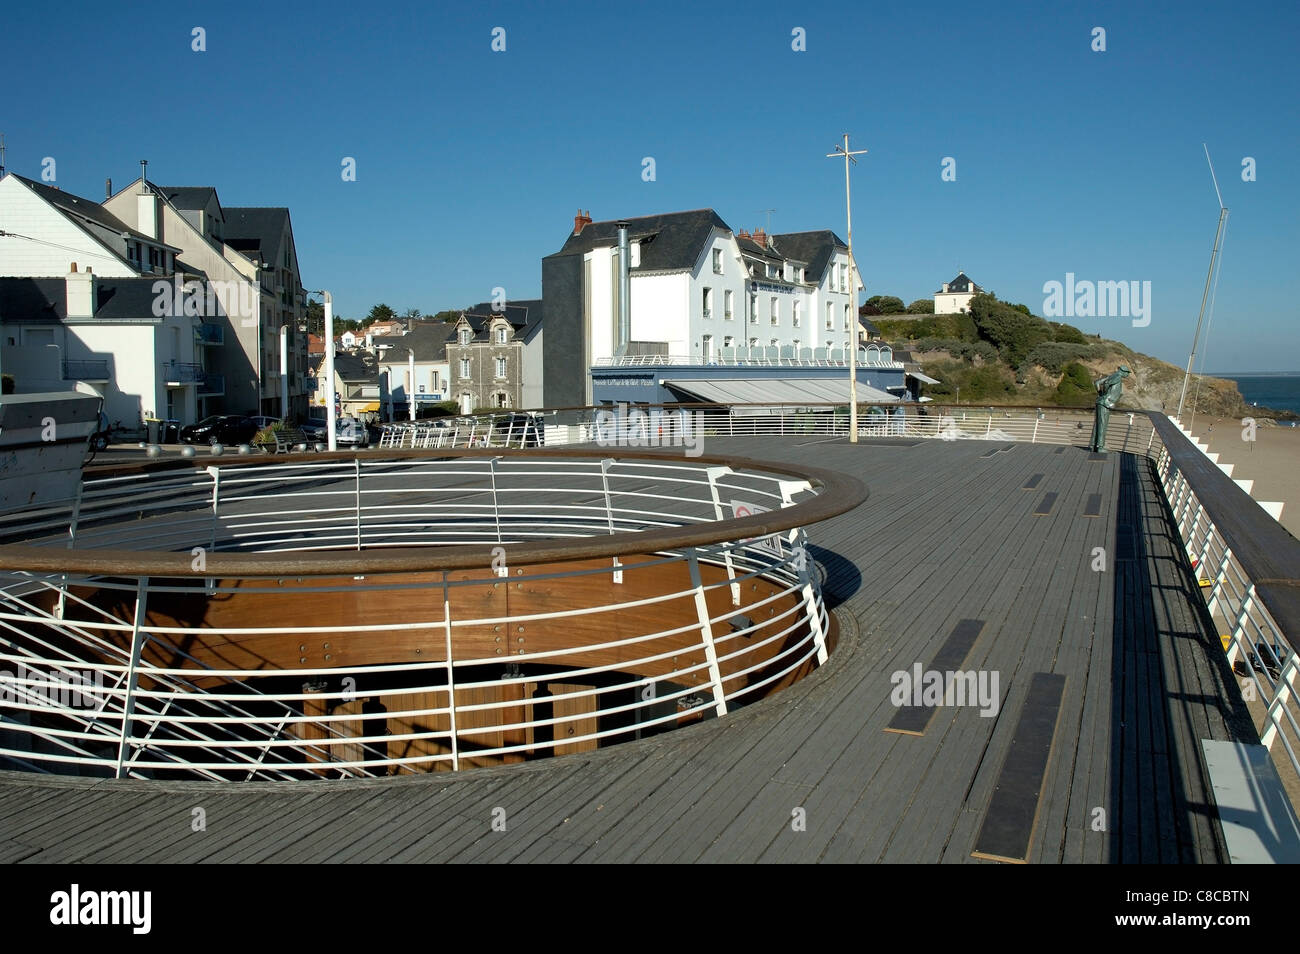 Jacques Tati statue looks out from the promenade over the beach at Saint-Marc-Sur-Mer, Brittany, France Stock Photo